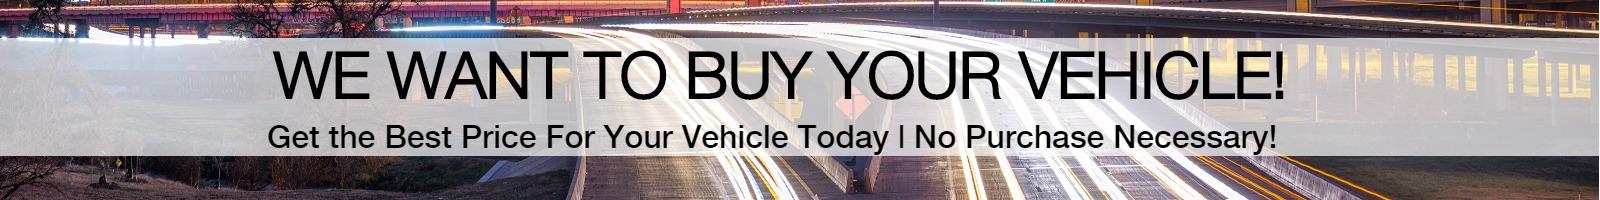 We Want To Buy Your Vehicle!